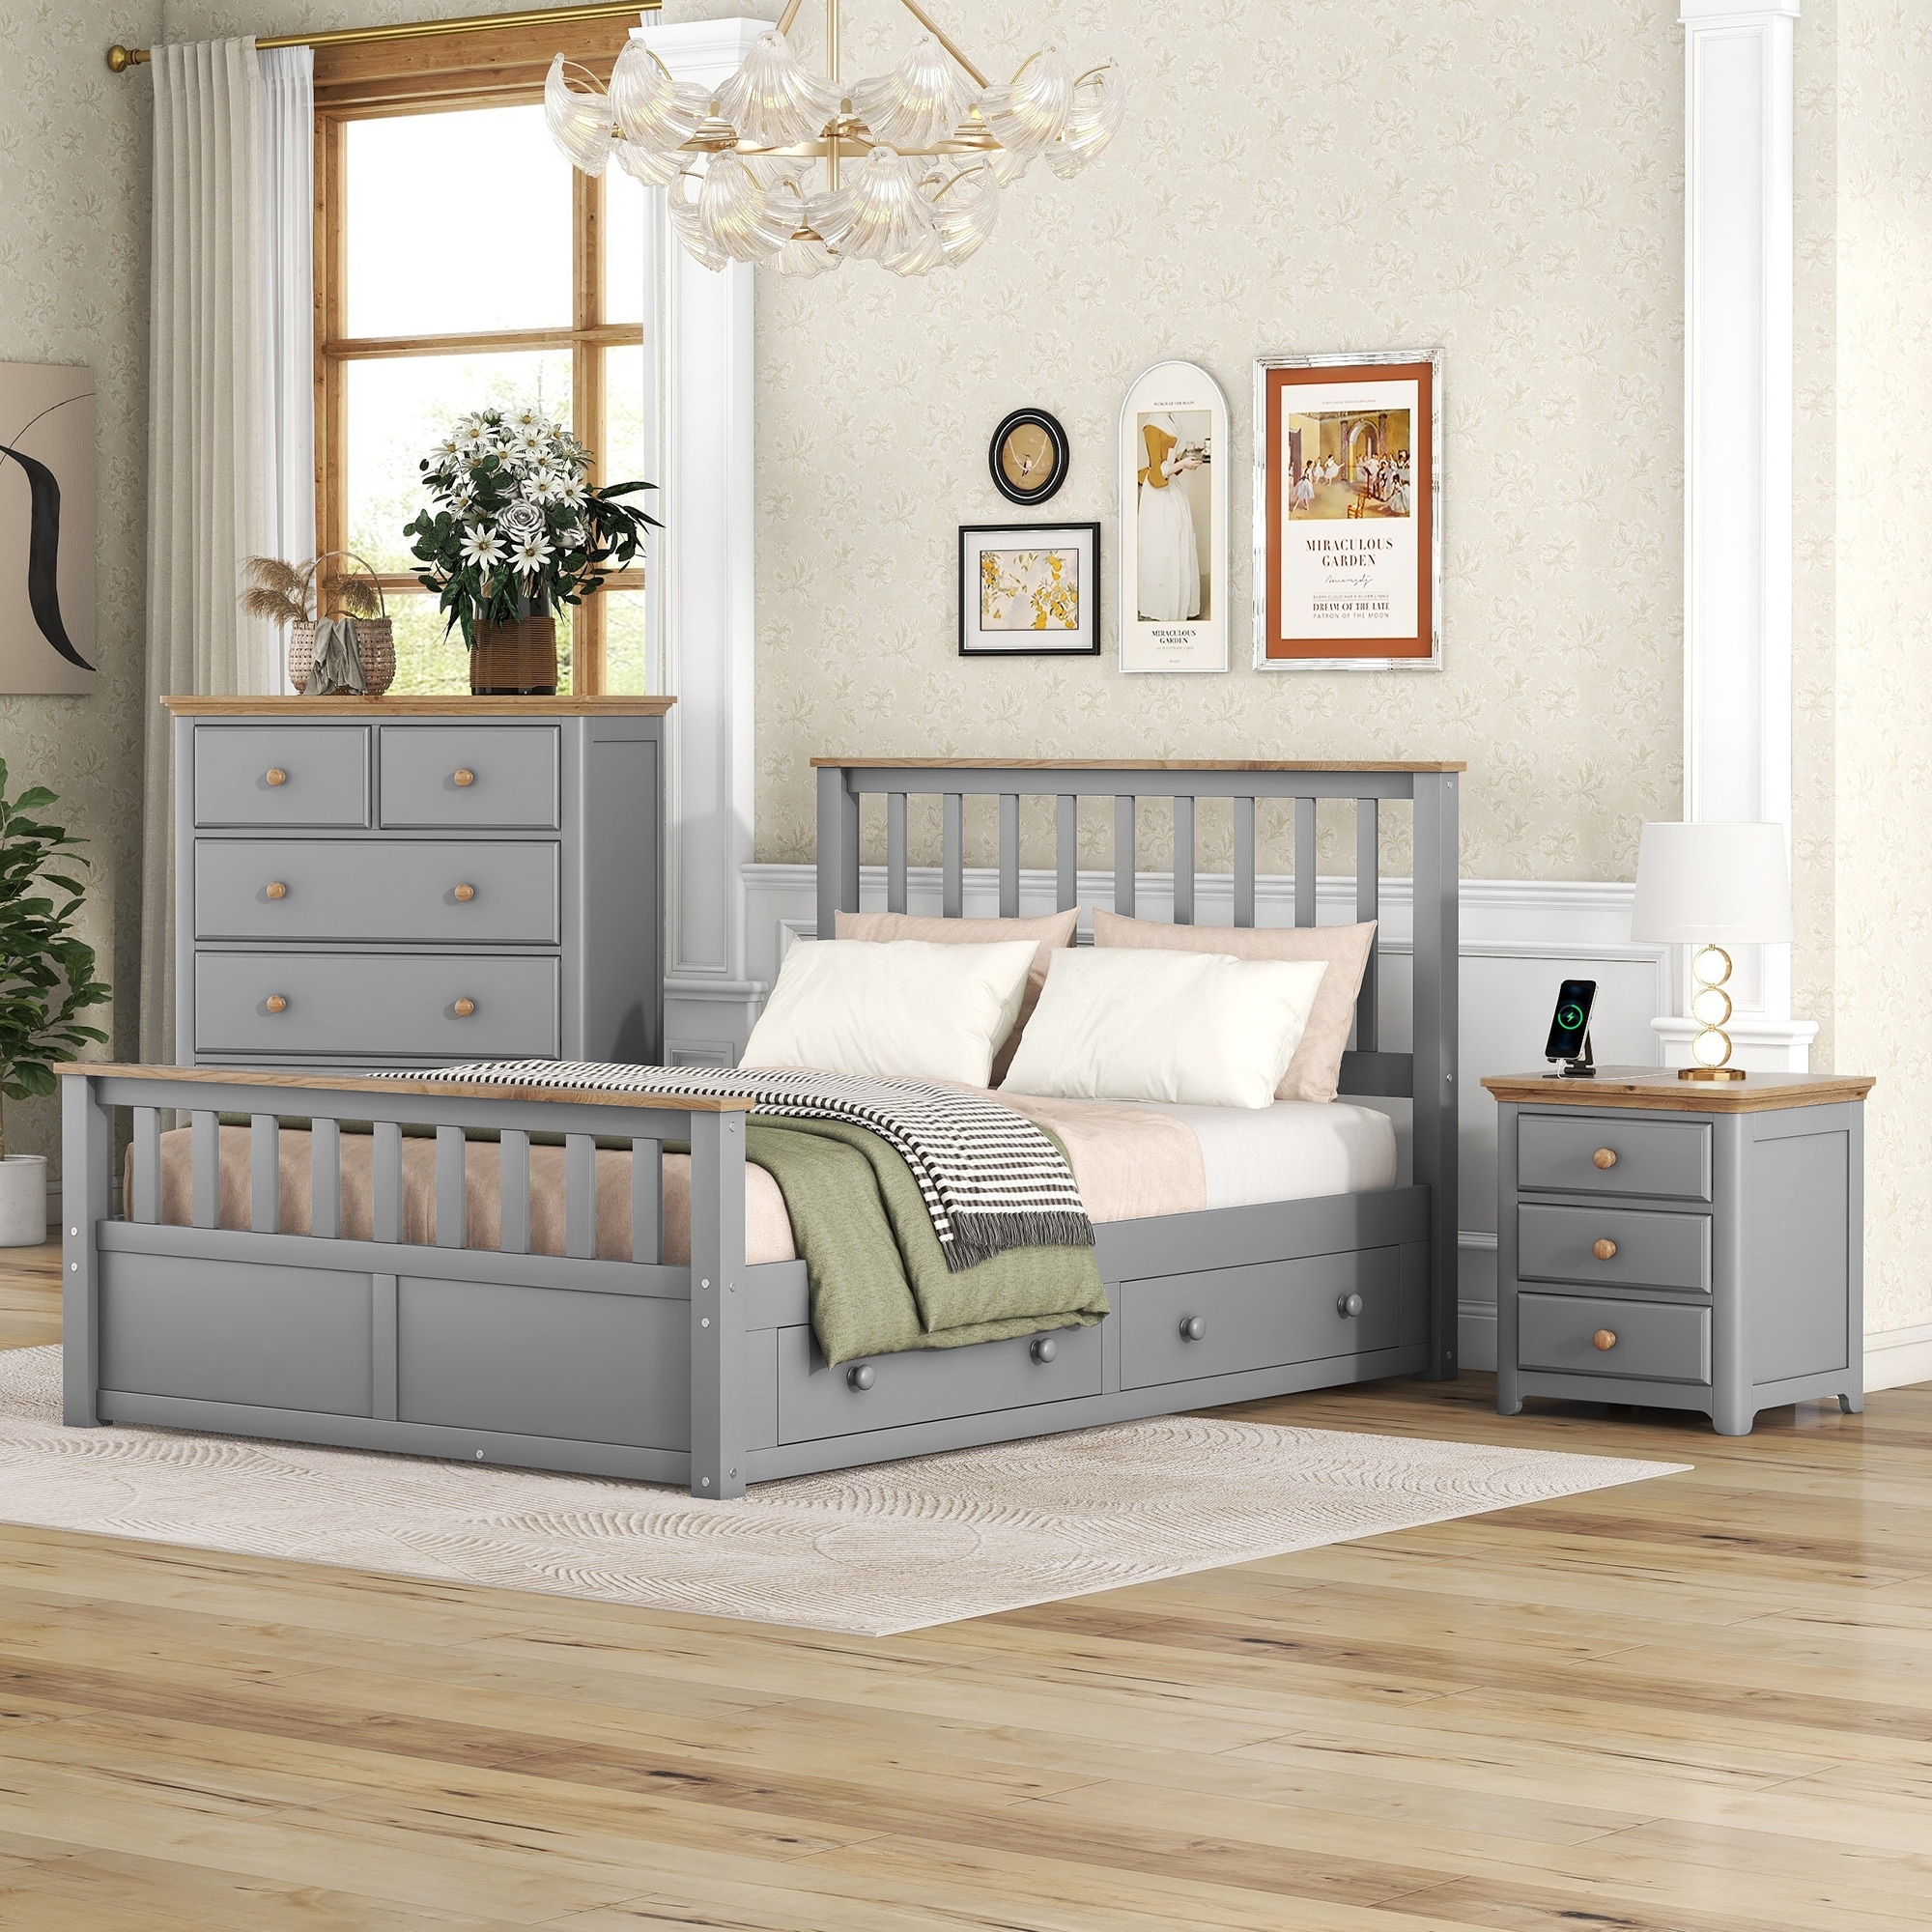 3-pieces Bedroom Sets Full Size Platform Bed With Nightstand(usb Charging Ports) And Storage Chest